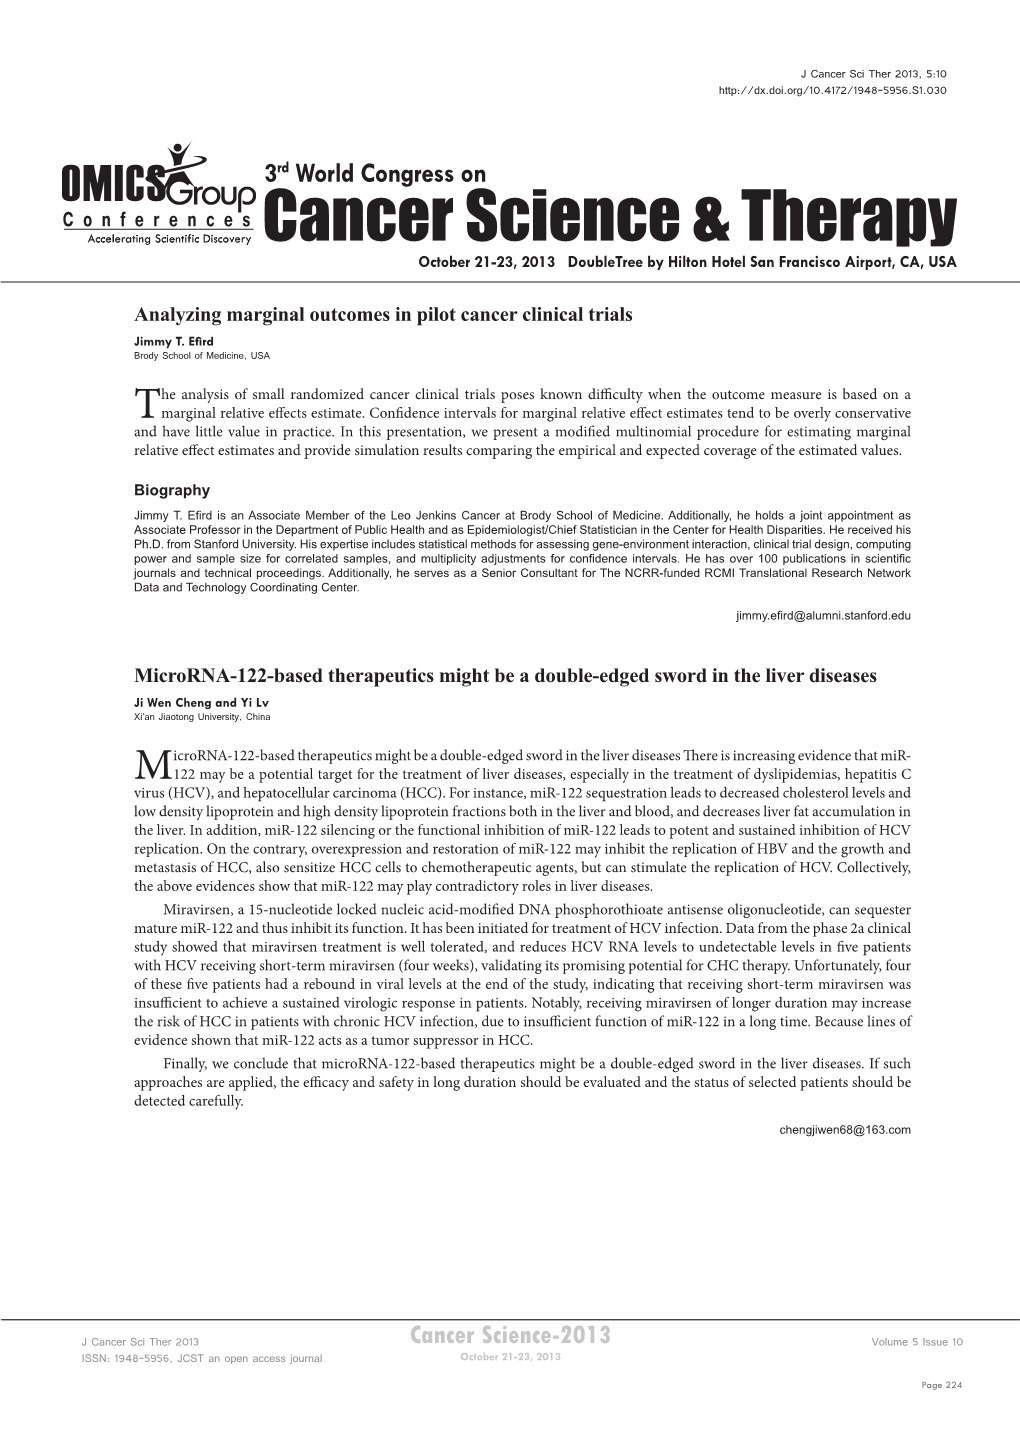 Cancer Science & Therapy